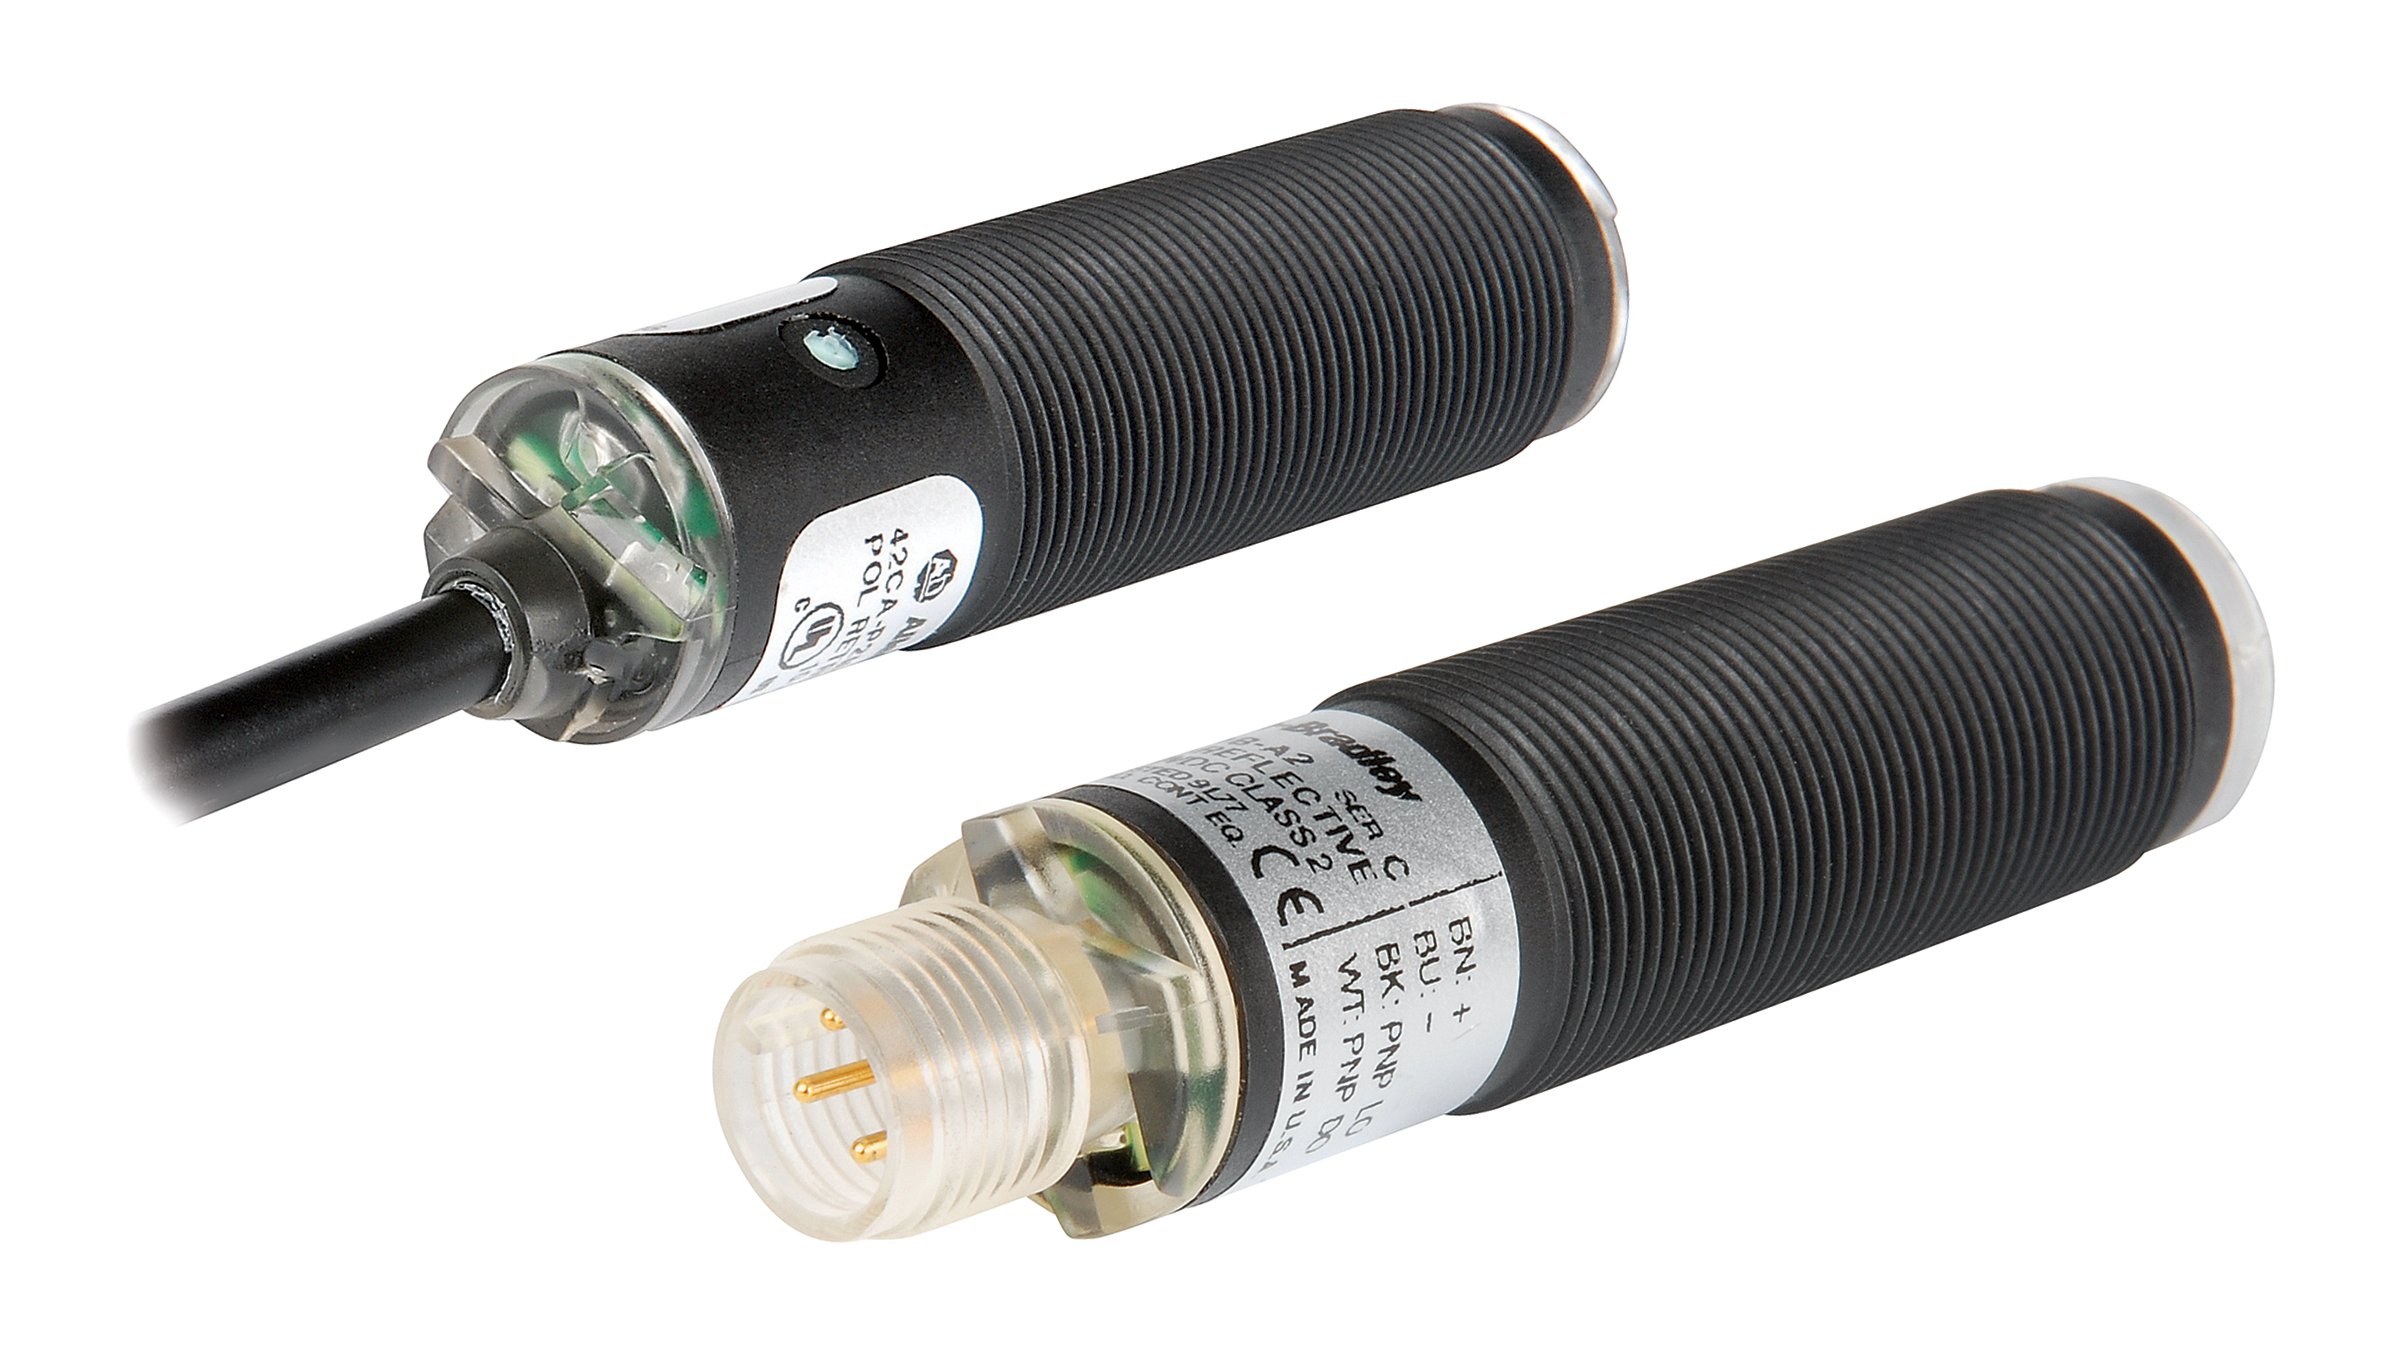 2 black, cylindrical sensors. One with a black integrated cable